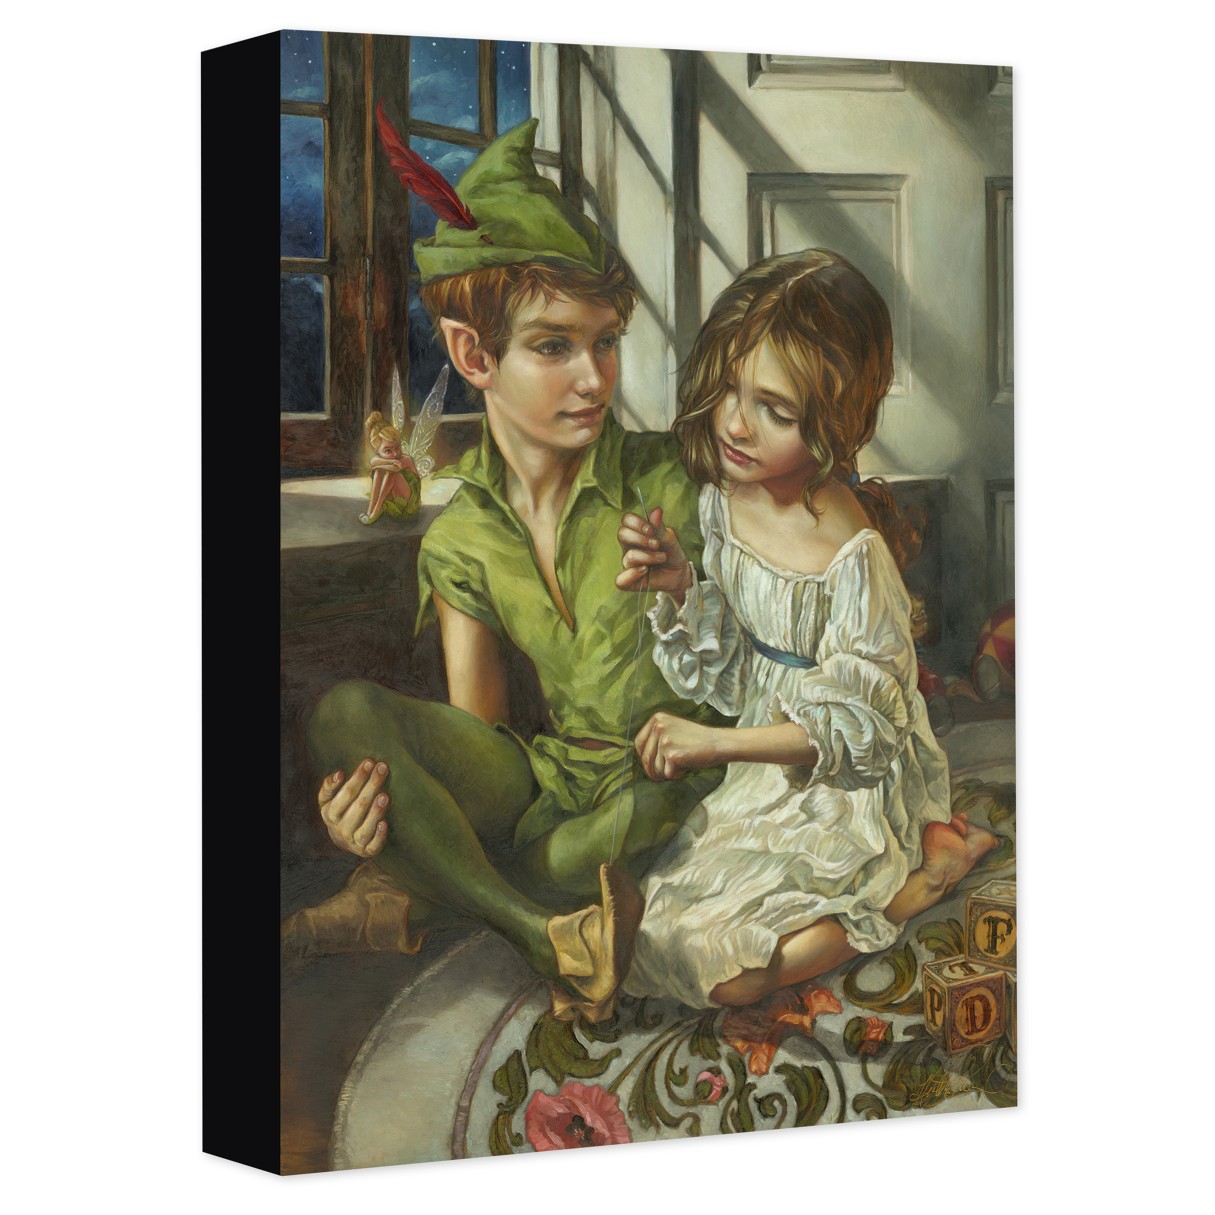 Peter Pan and Wendy ''Sewn to His Shadow'' Giclée on Canvas by Heather Edwards